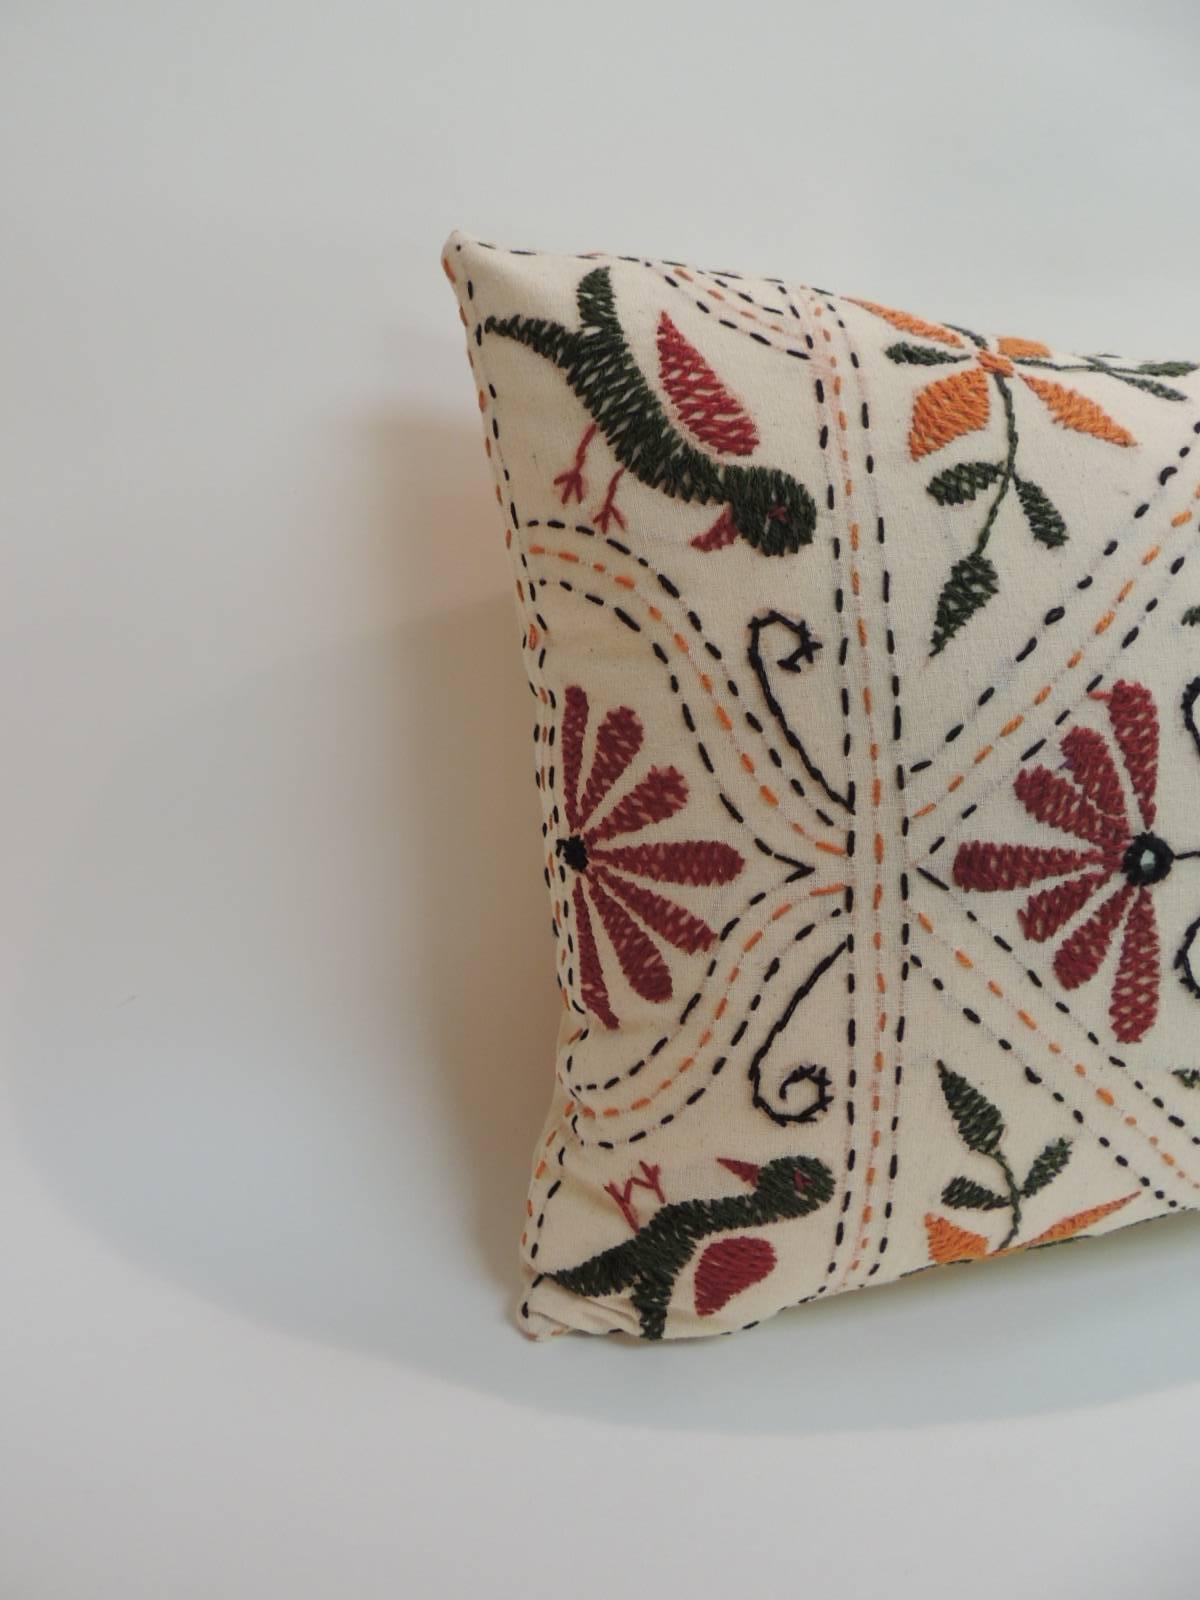 Suzani Vintage Embroidery Indian Bolster Decorative Pillow